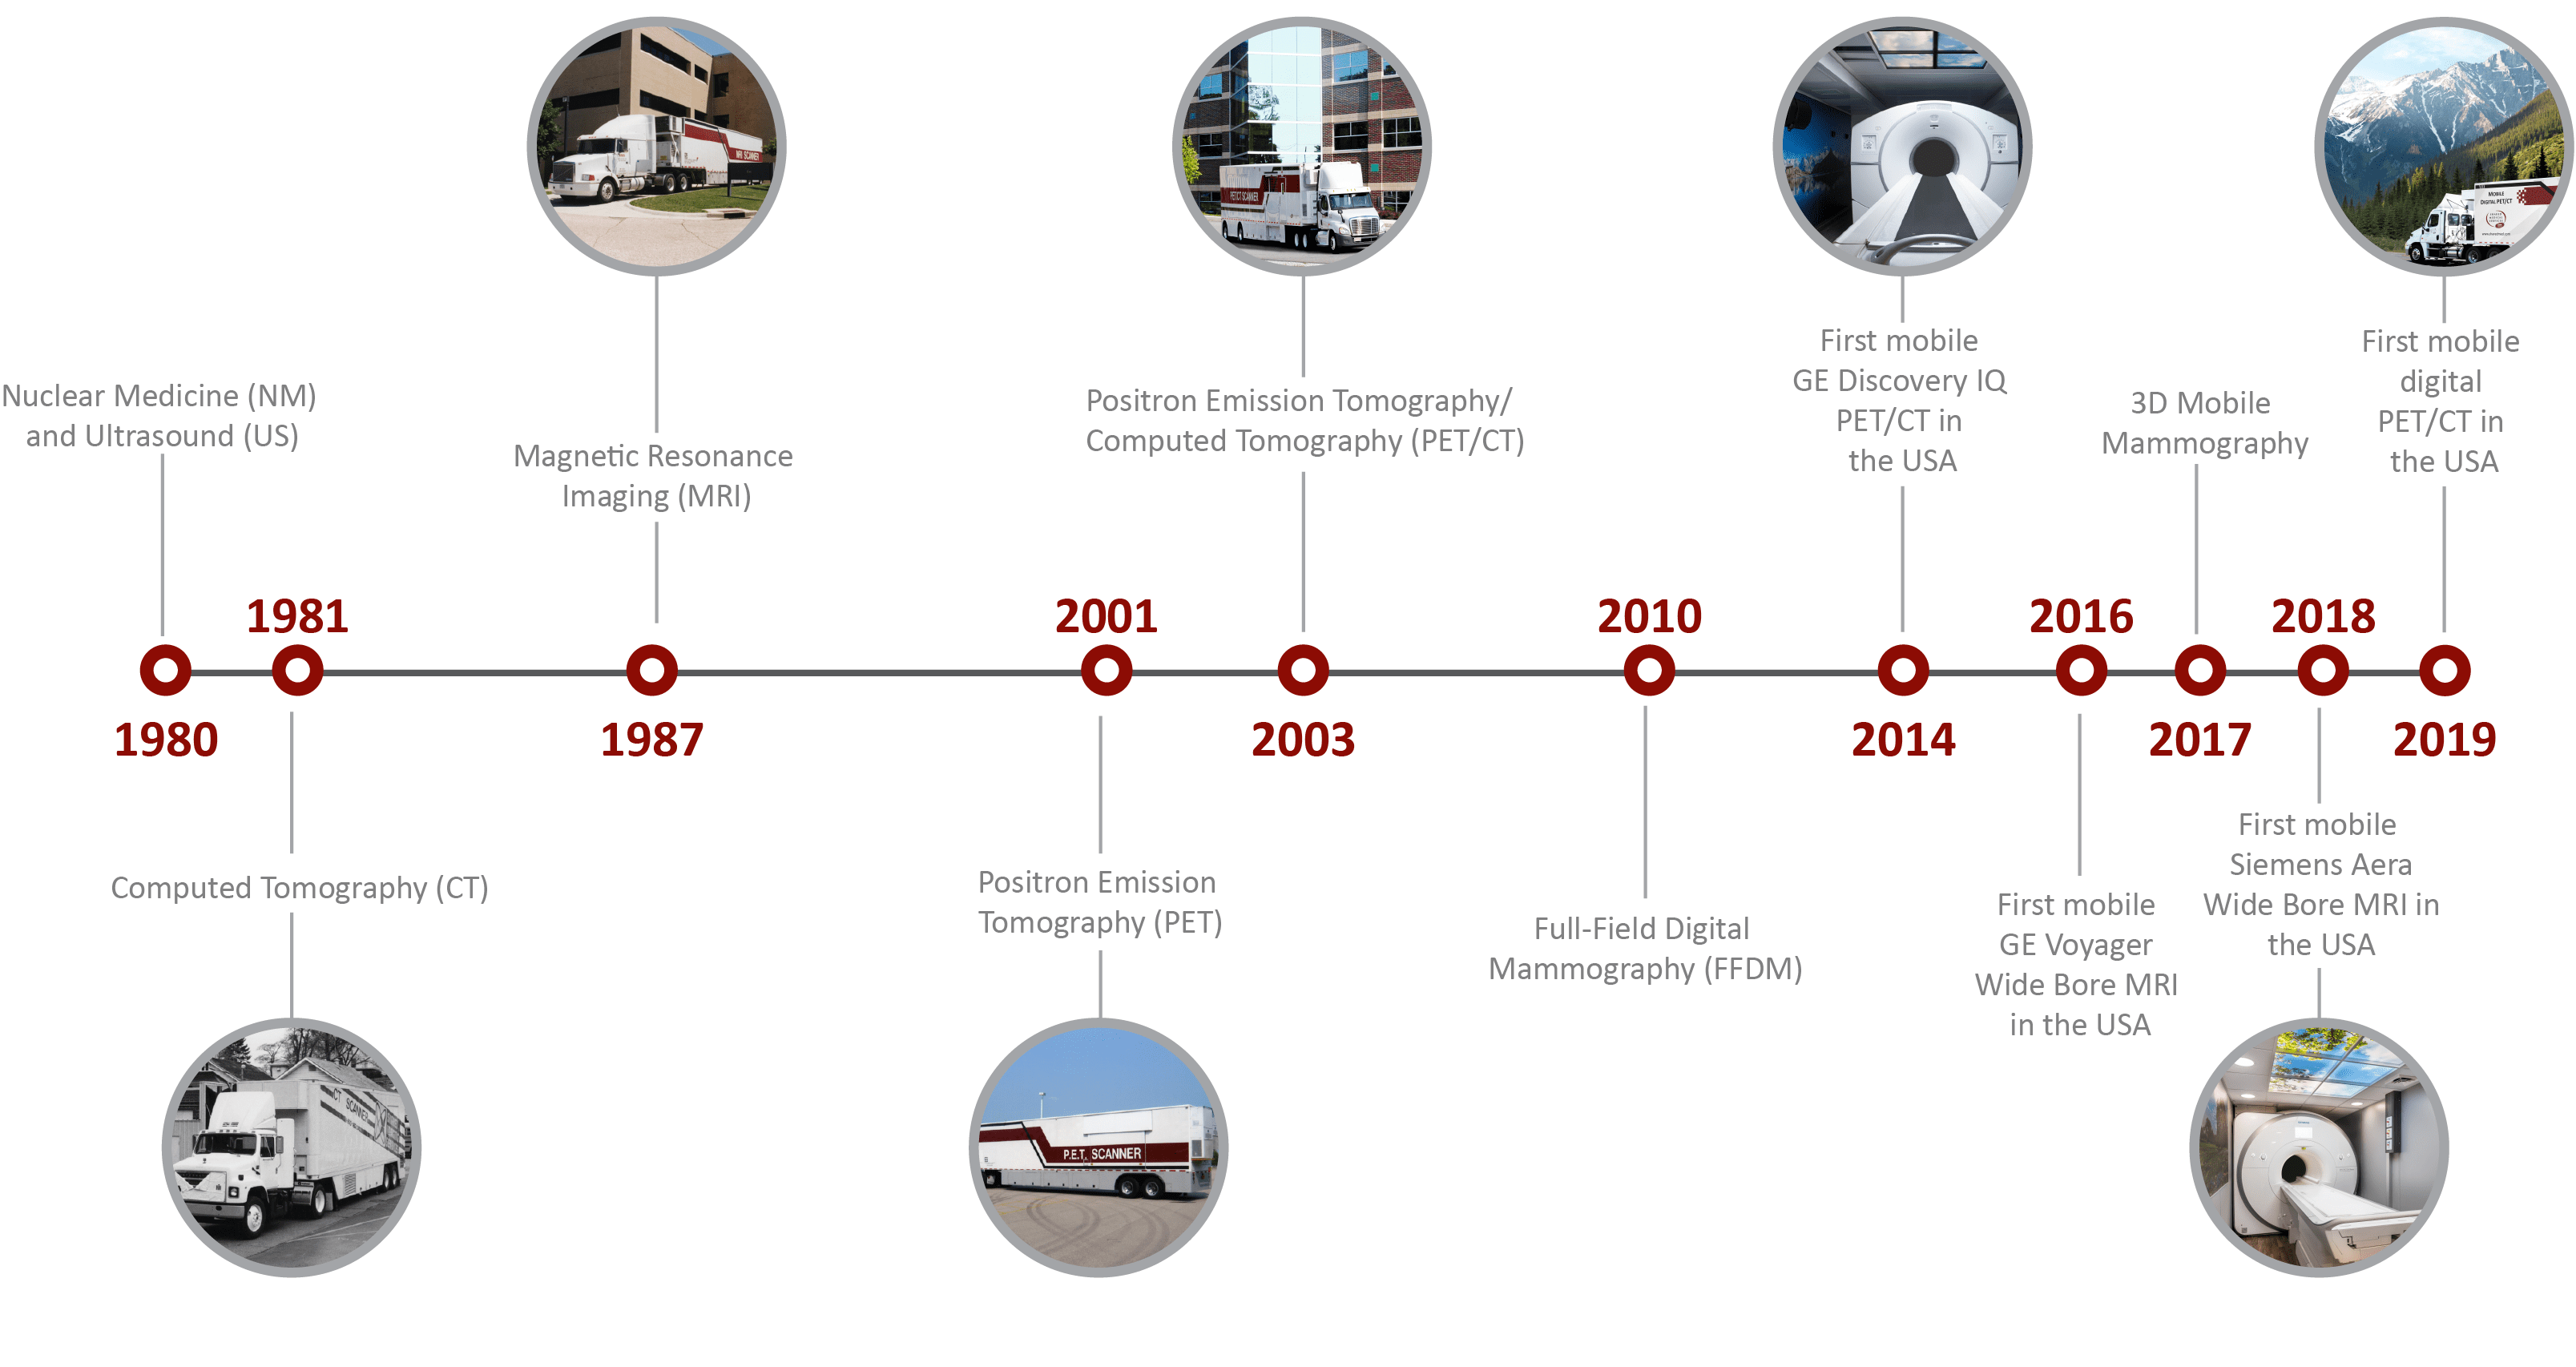 SMS Equipment Timeline_NEW